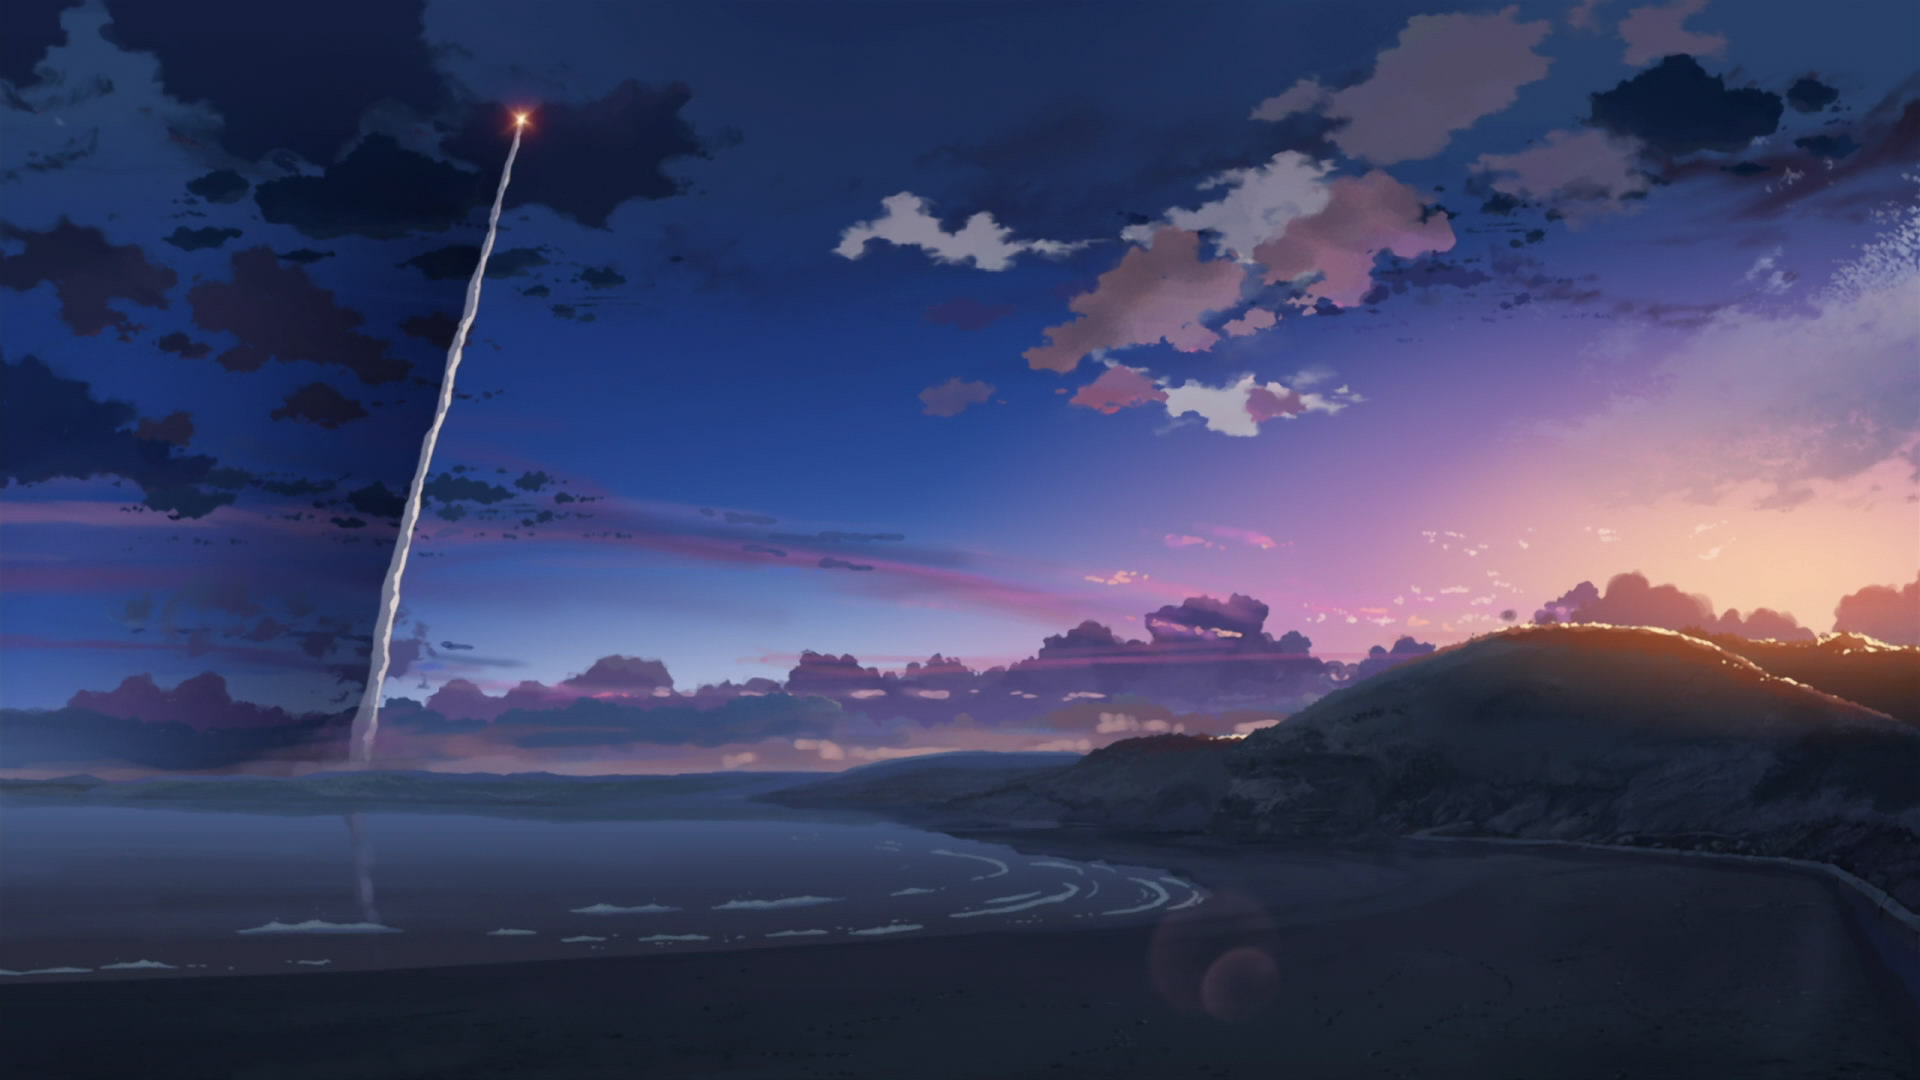 Download full hd 1920x1080 5 (cm) Centimeters Per Second computer wallpaper ID:90087 for free